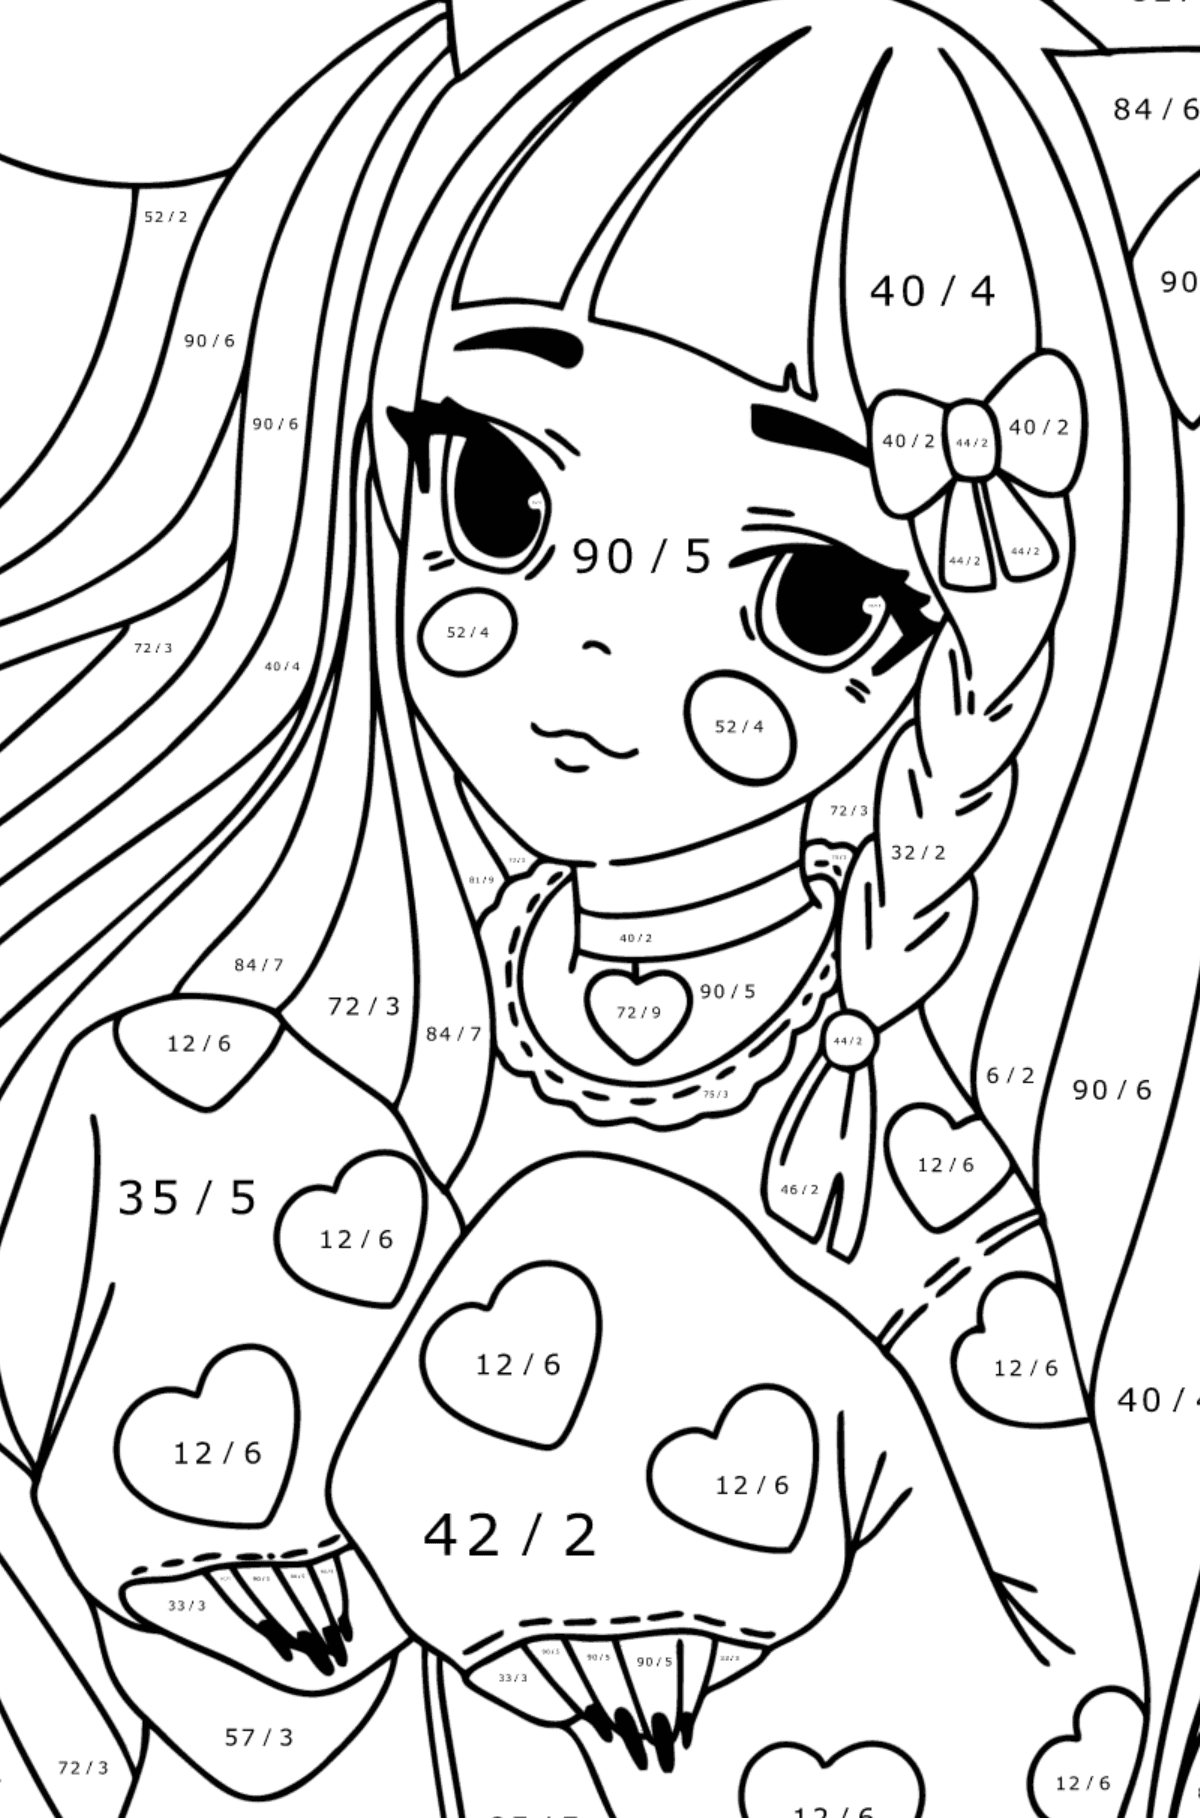 Anime girl with ears and paws coloring page - Math Coloring - Division for Kids